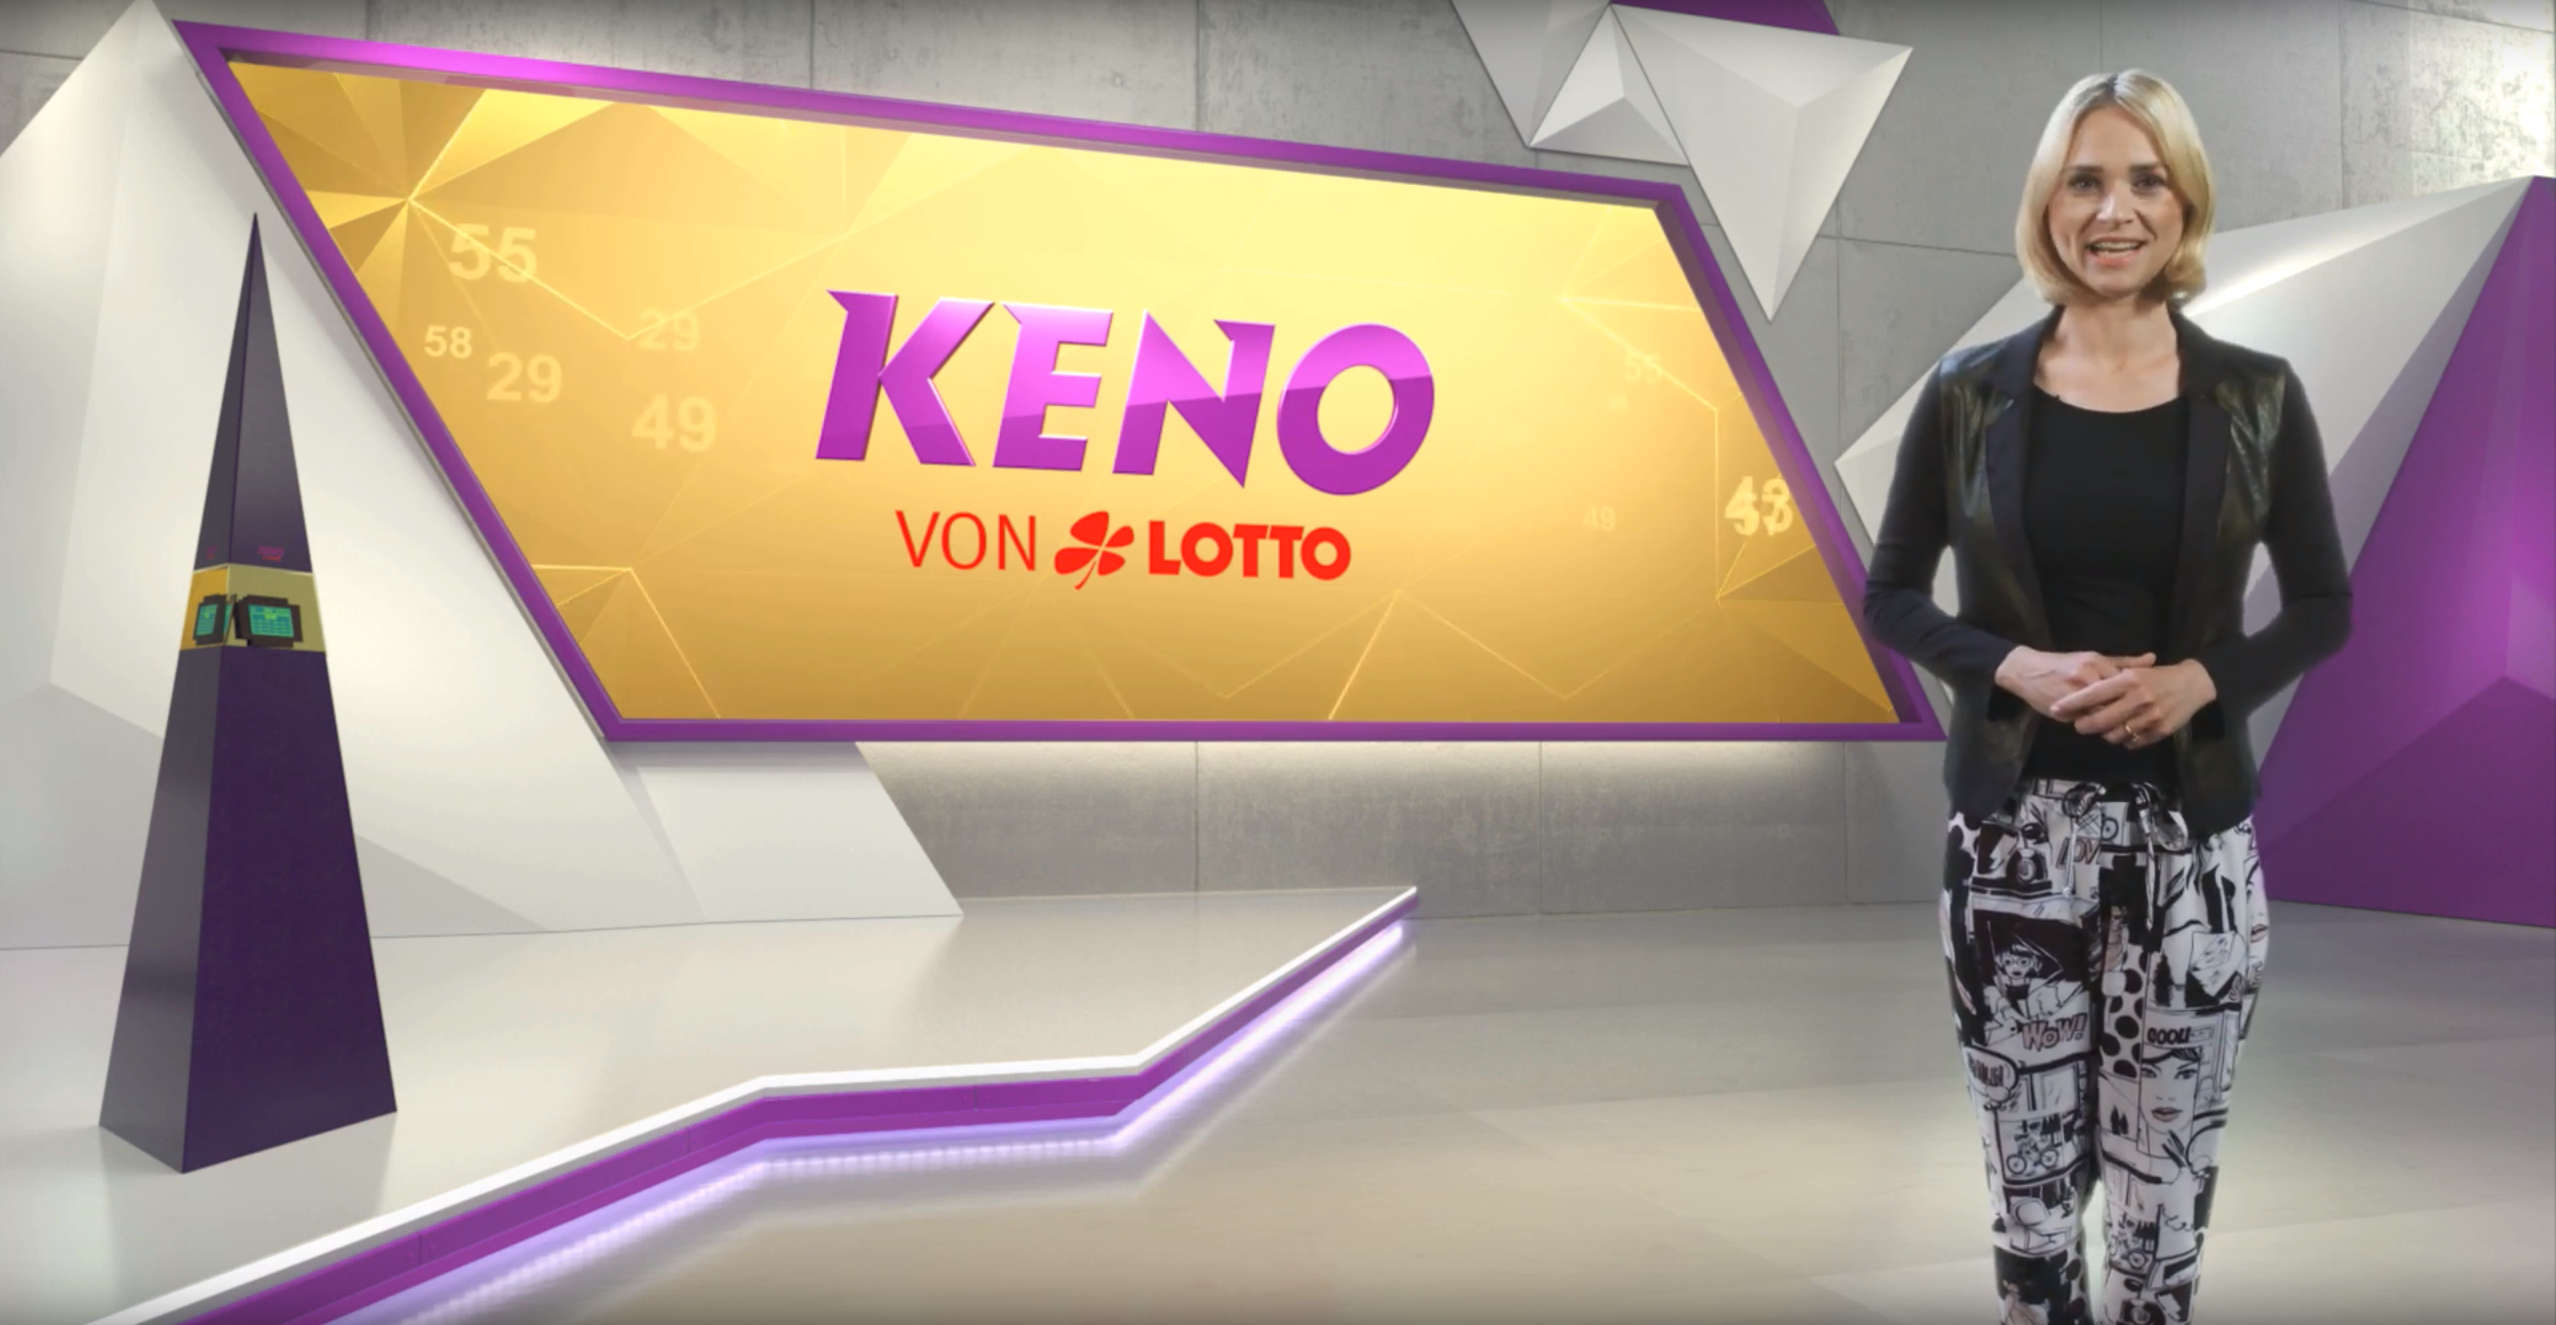 sum.cumo produced broadcasts for KENO